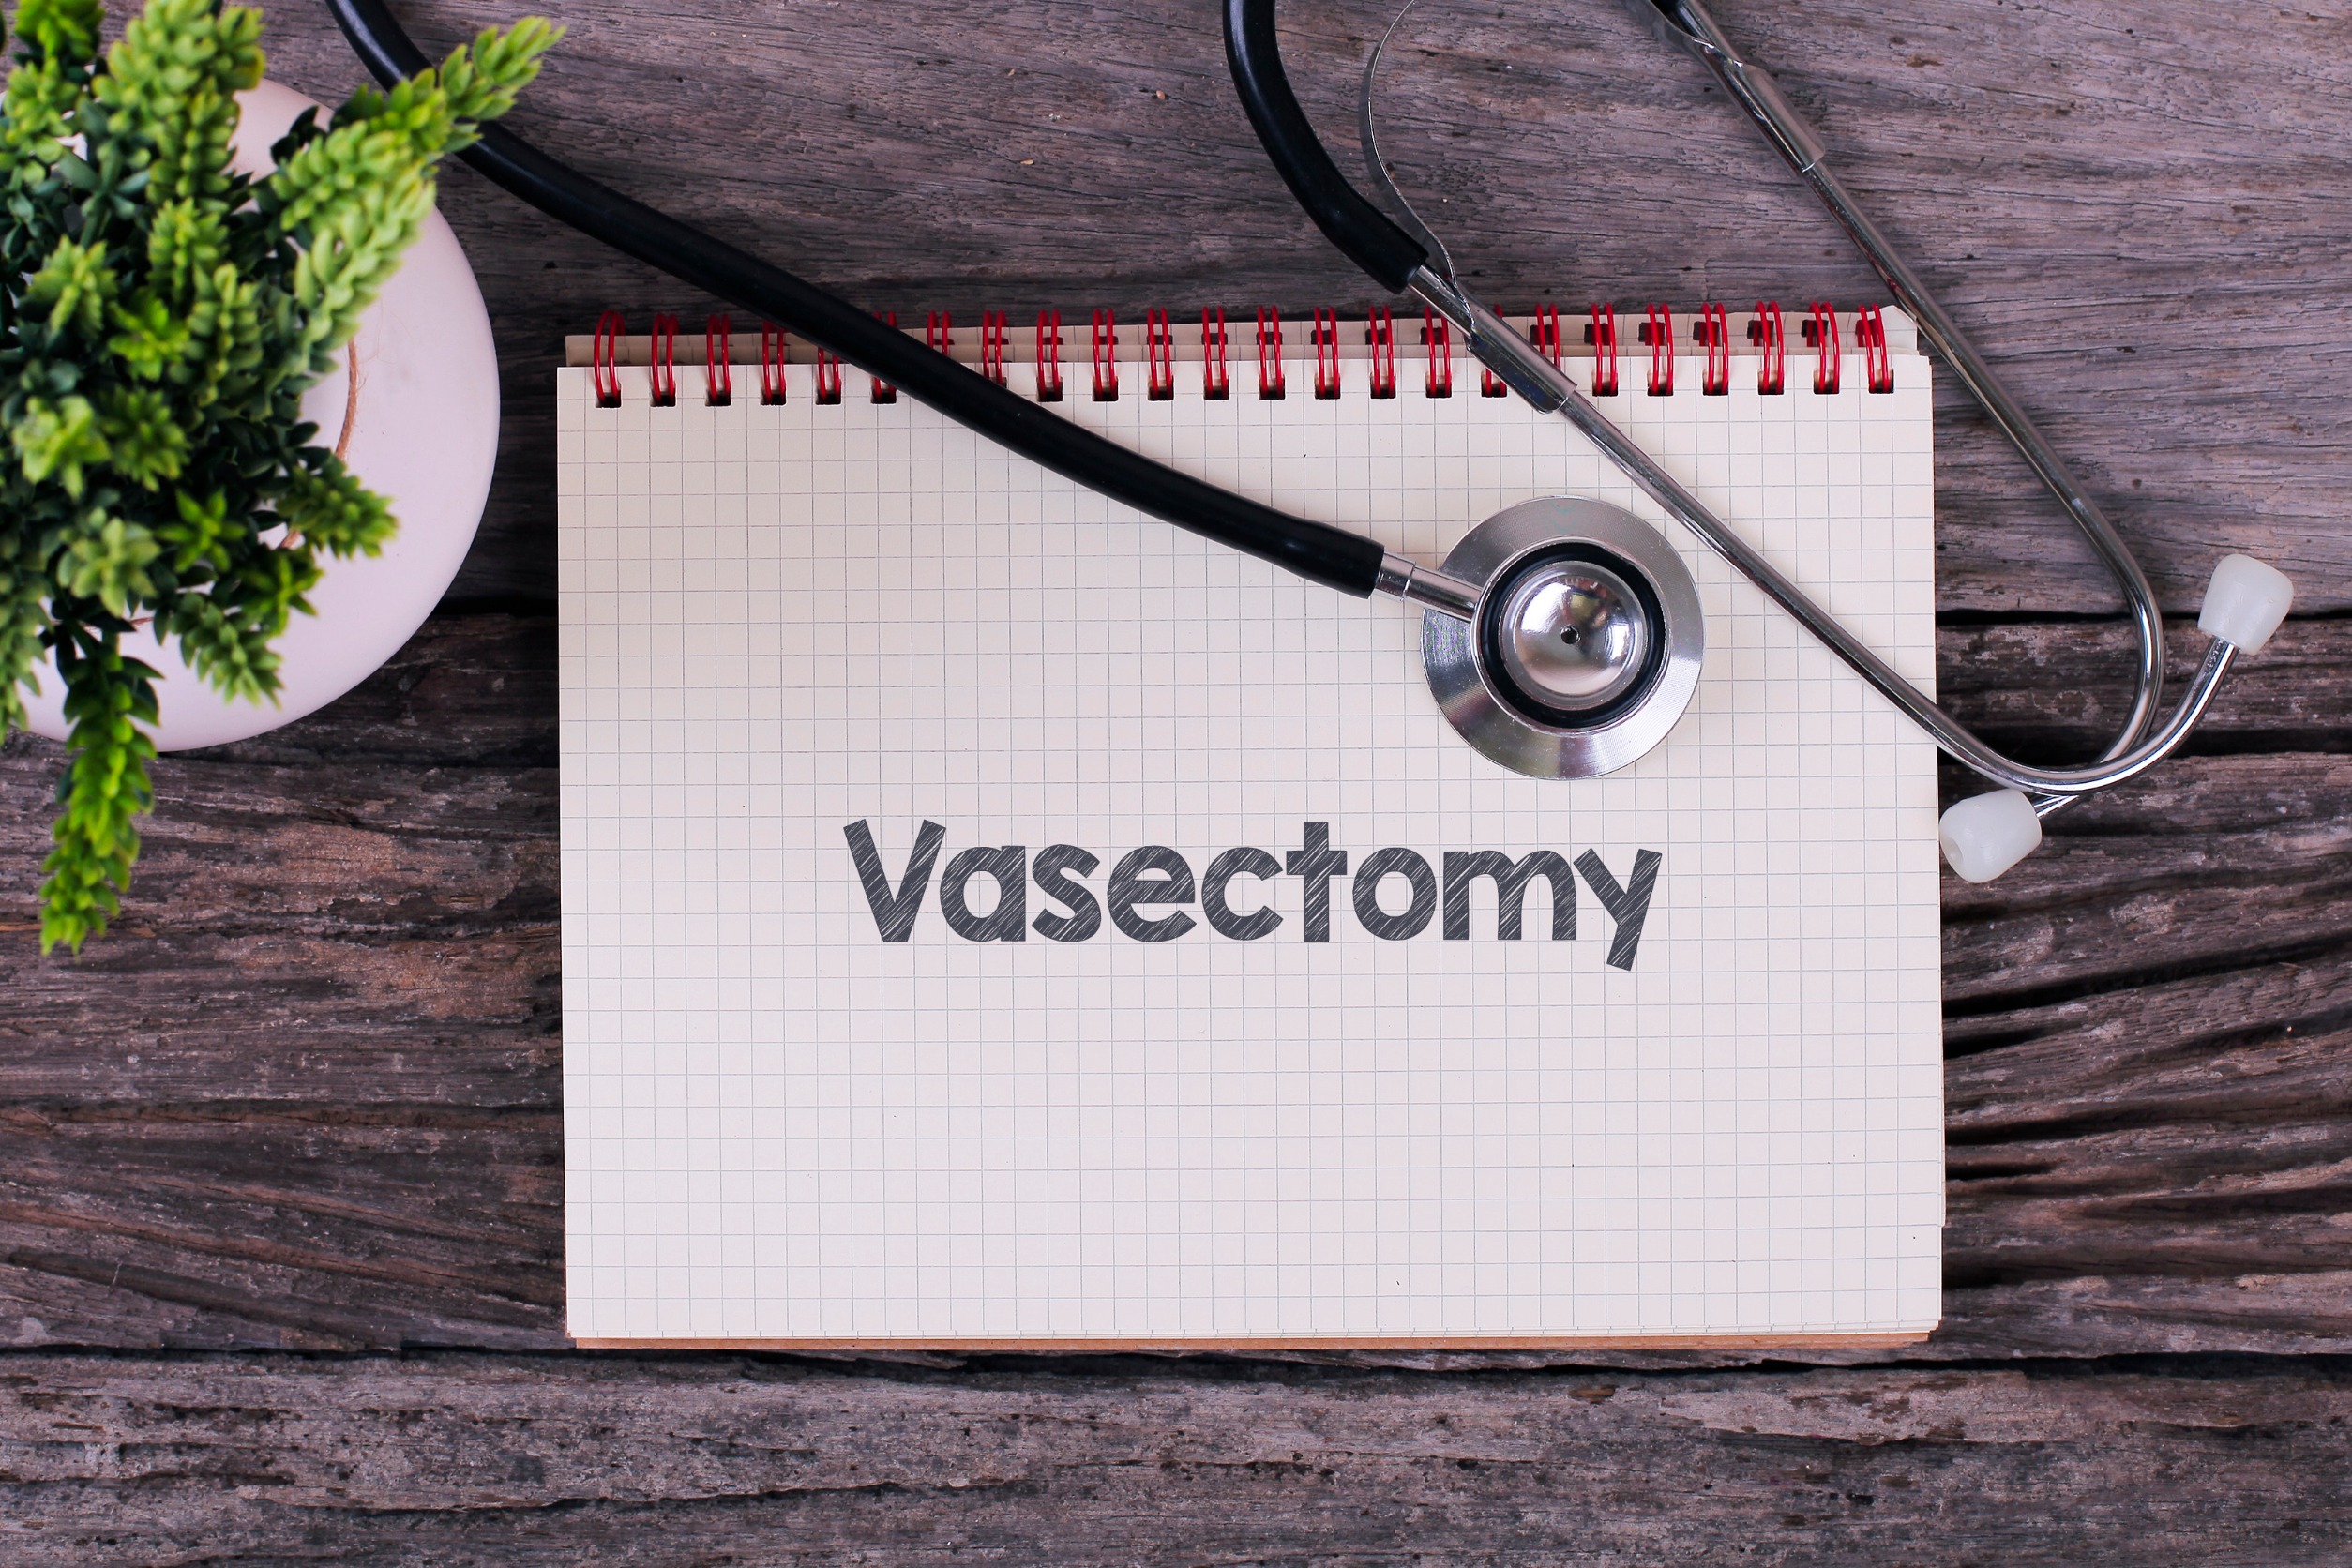 How Does a Vasectomy Affect Testosterone Levels & Sexual Function?